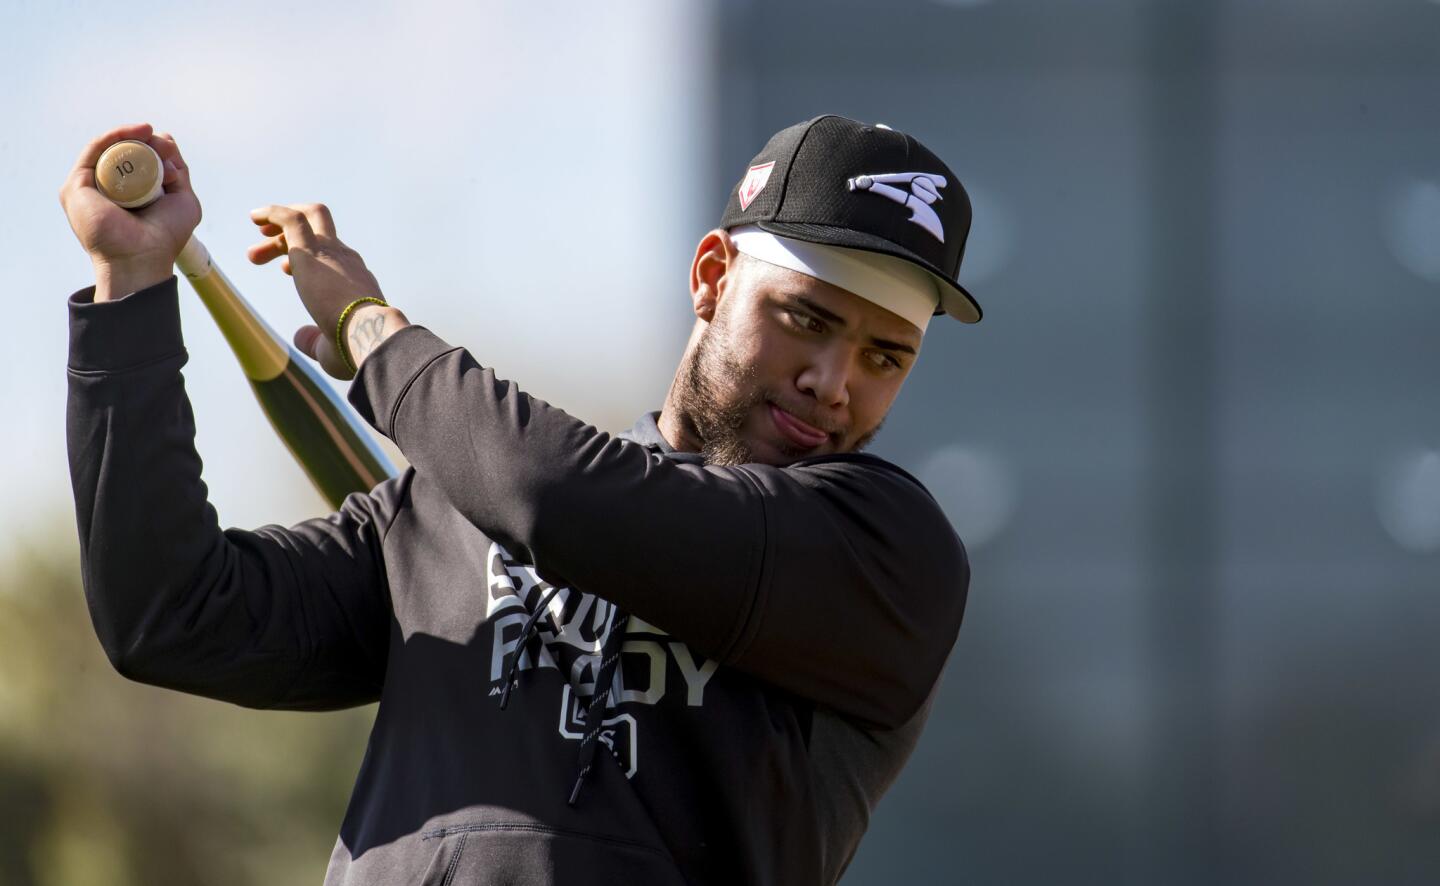 White Sox second baseman Yoan Moncada takes a practice swing during spring training at Camelback Ranch in Glendale, Ariz., on Saturday, Feb. 16, 2019.